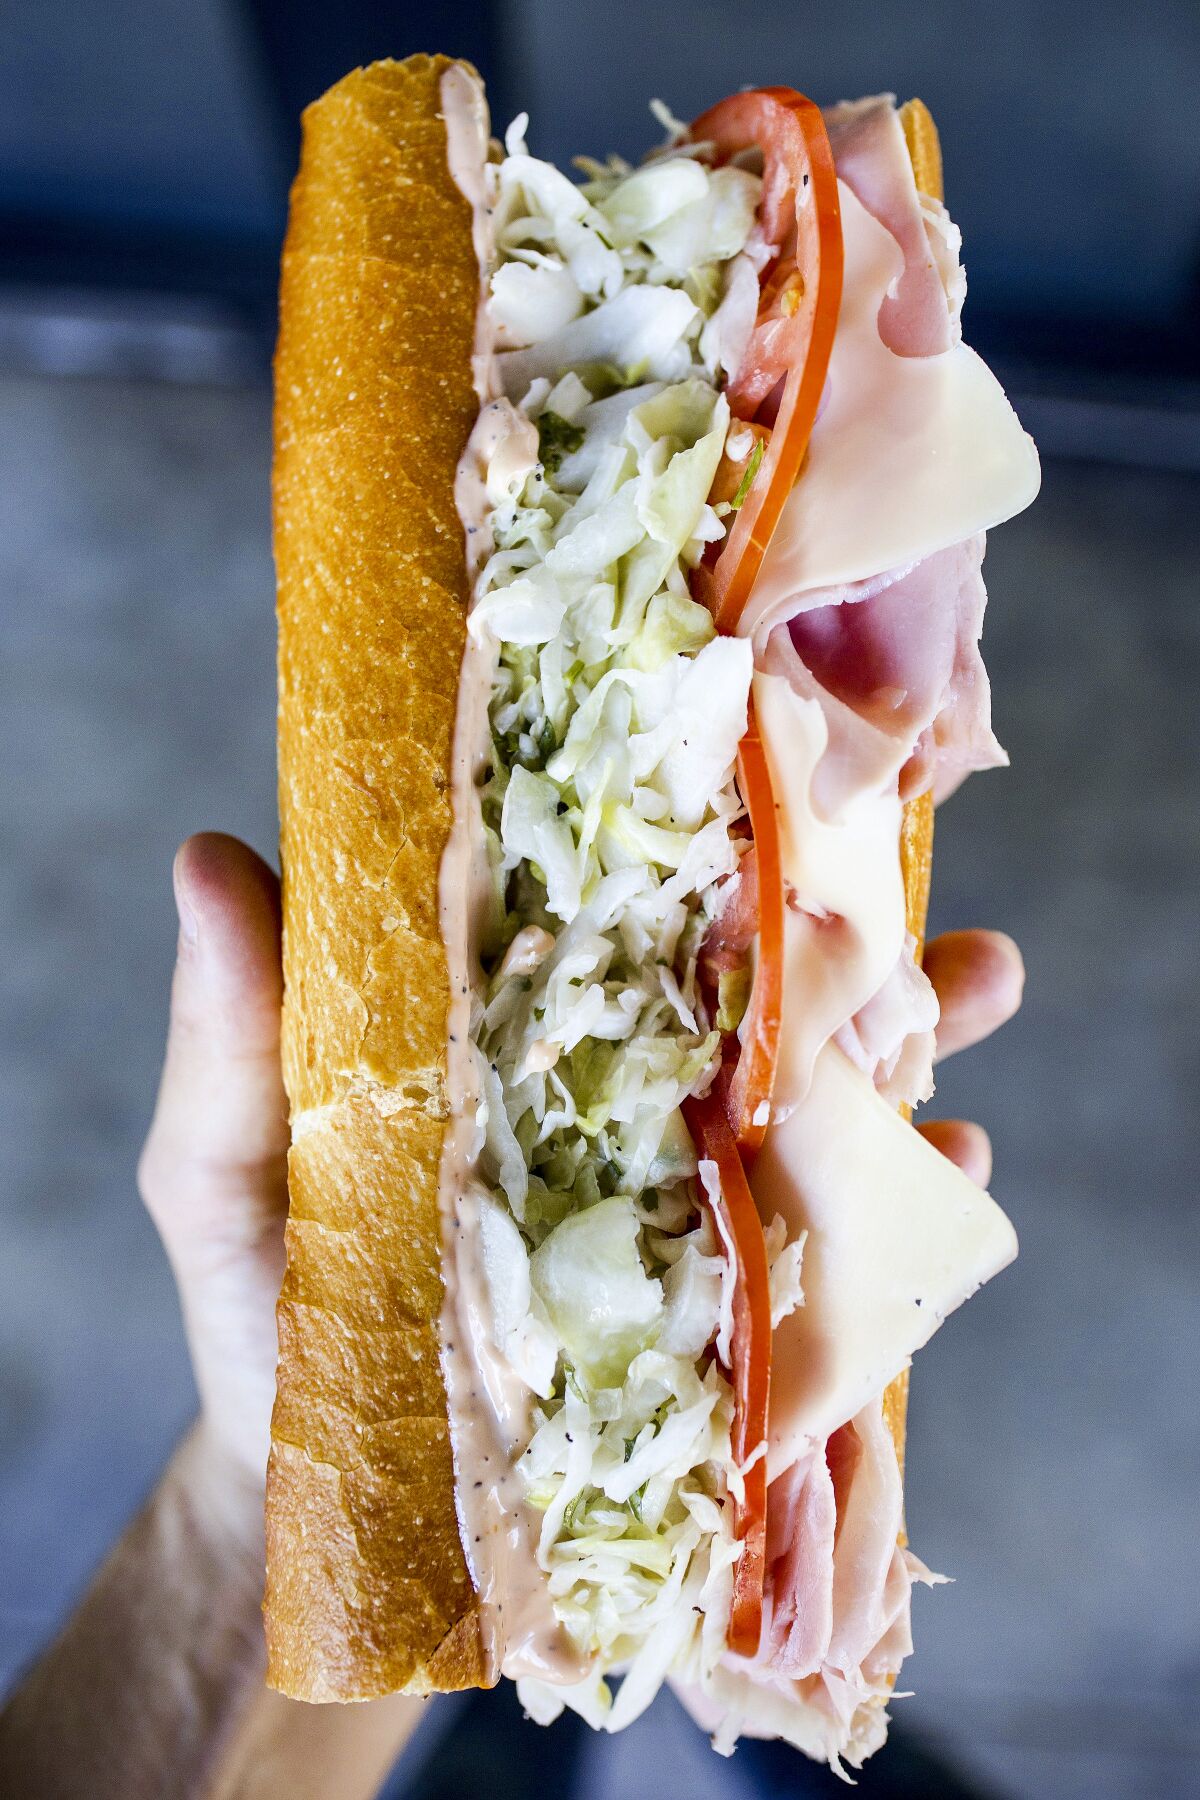 A photo of a hand holding a large ham and cheese sandwich on baguette, the Heavenly Ham N Swiss.